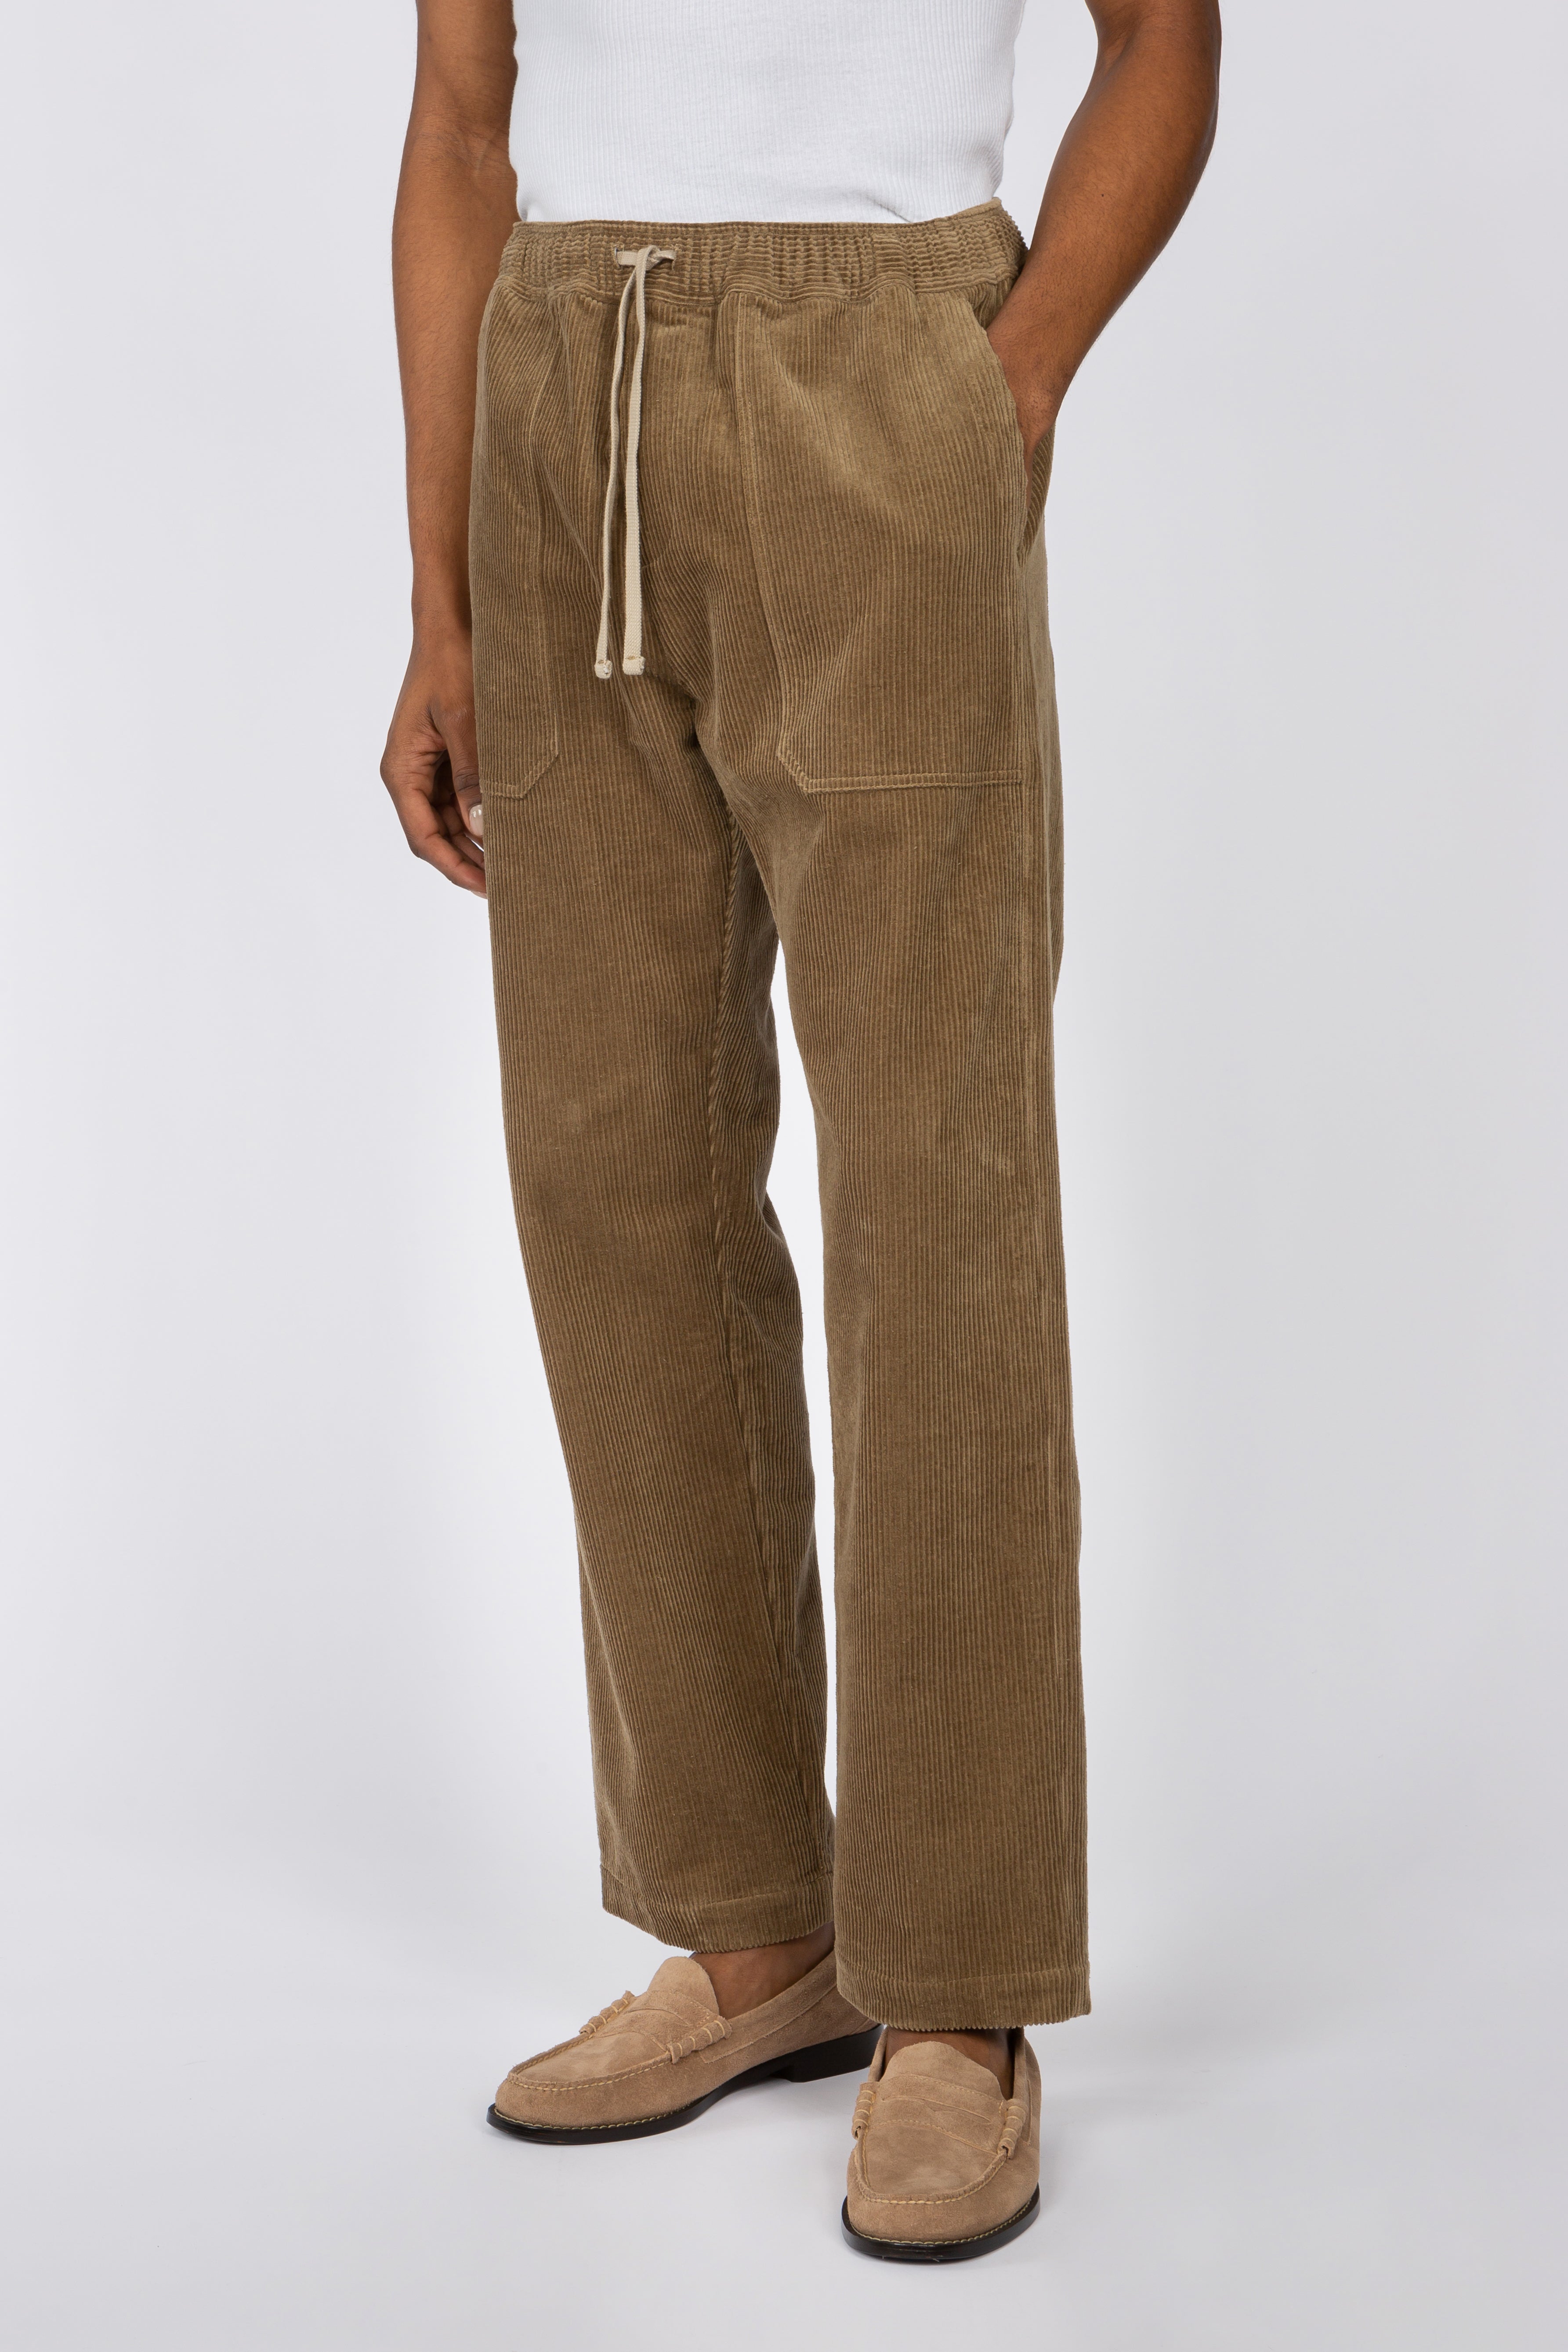 Loose Leg Easy Pant - Army Corduroy – SHADES OF GREY BY MICAH COHEN